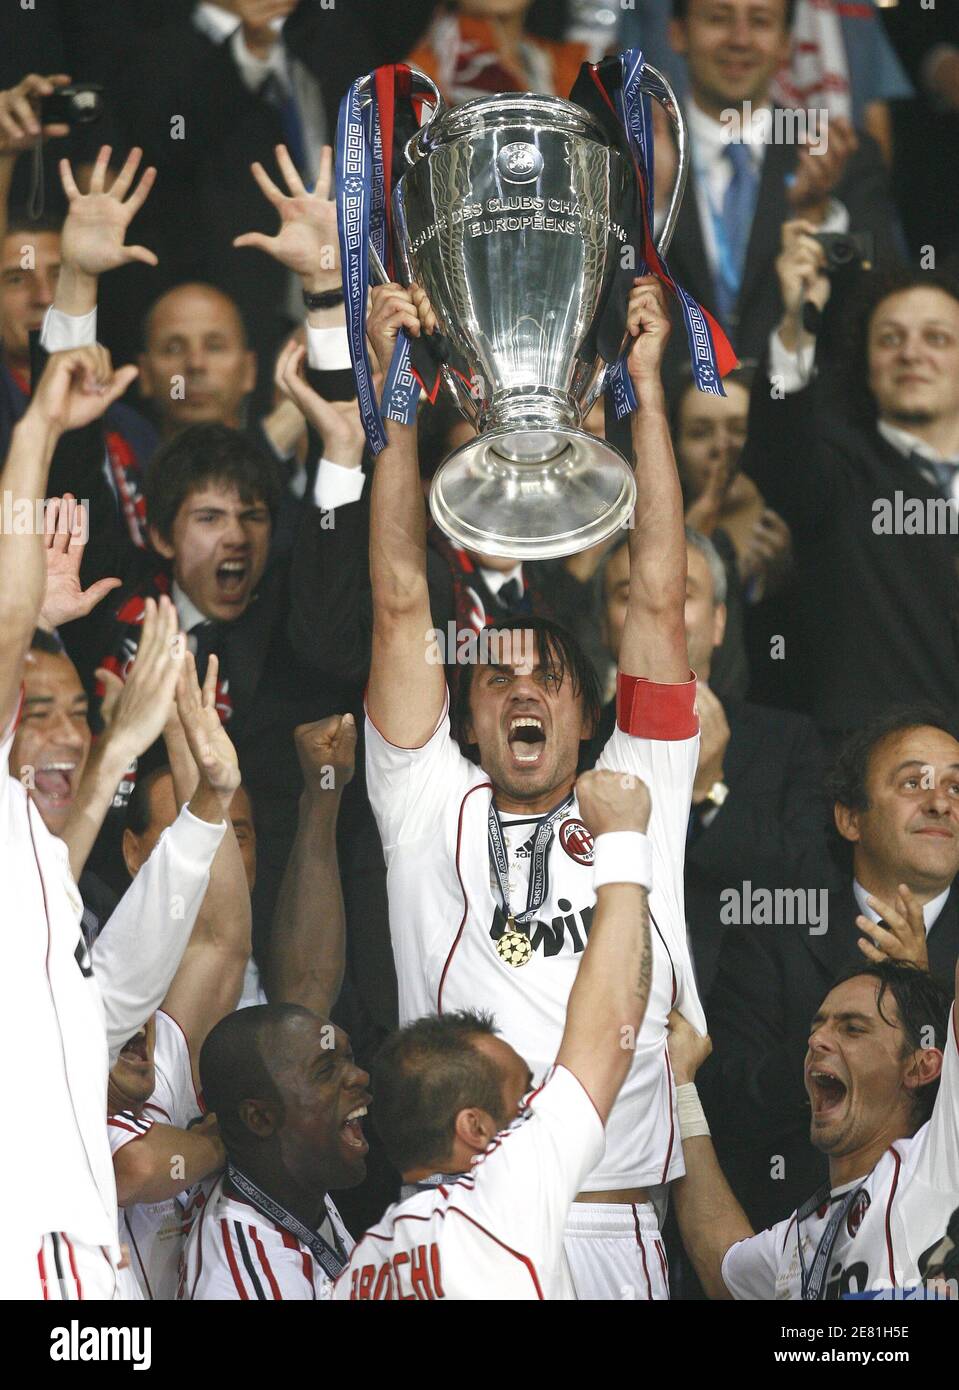 AC Milan's Paolo Maldini celebrates with the trophy during the UEFA Champions League Final, AC Milan v Liverpool at Olympic Stadium, in Athens, Greece, on May 23, 2007. AC Milan won 2-1. Photo by Christian Liewig/ABACAPRESS.COM Stock Photo